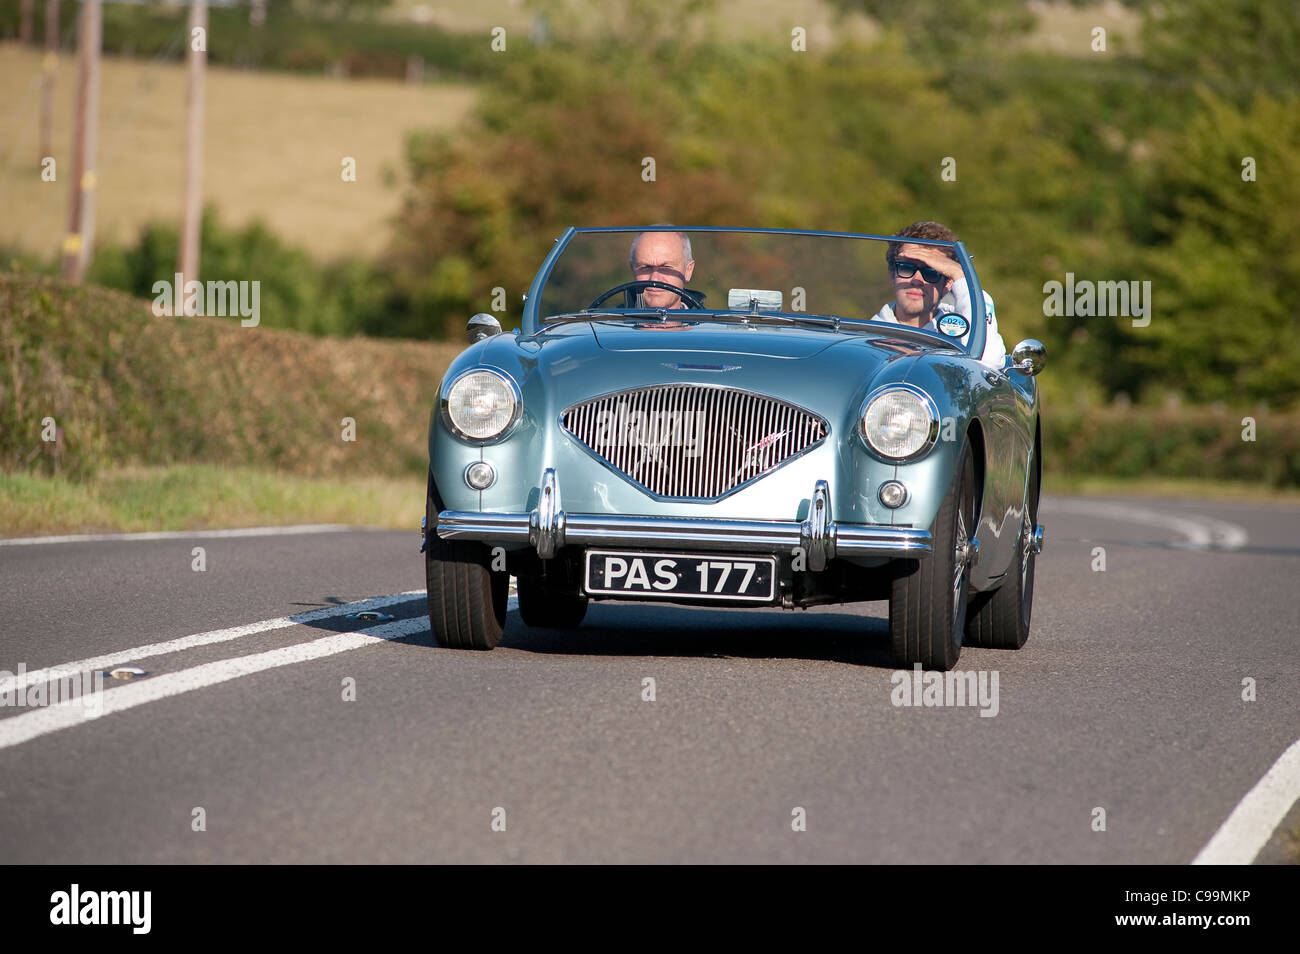 1950's Austin-Healey 100 car being driven through rural England in the summertime. Stock Photo